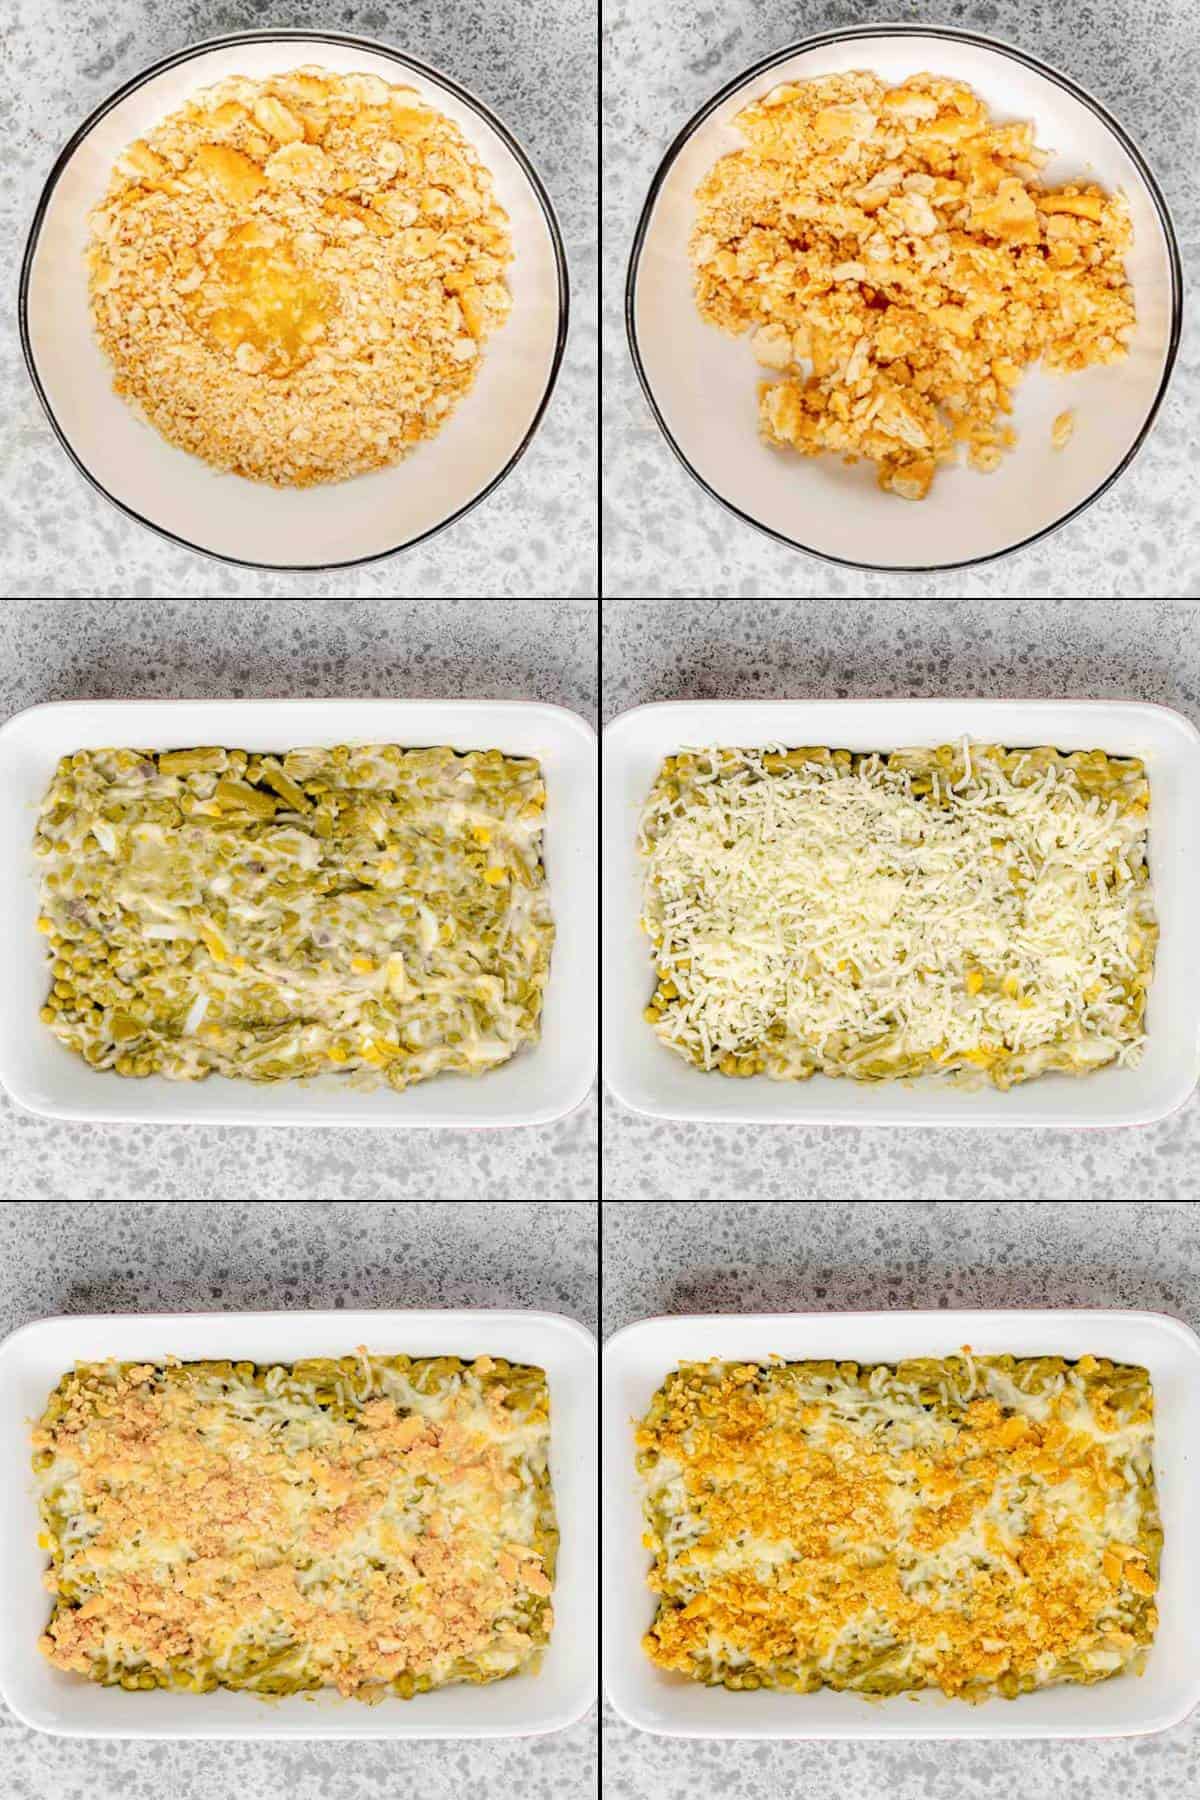 Collage of making canned asparagus casserole toping and assembling the dish.